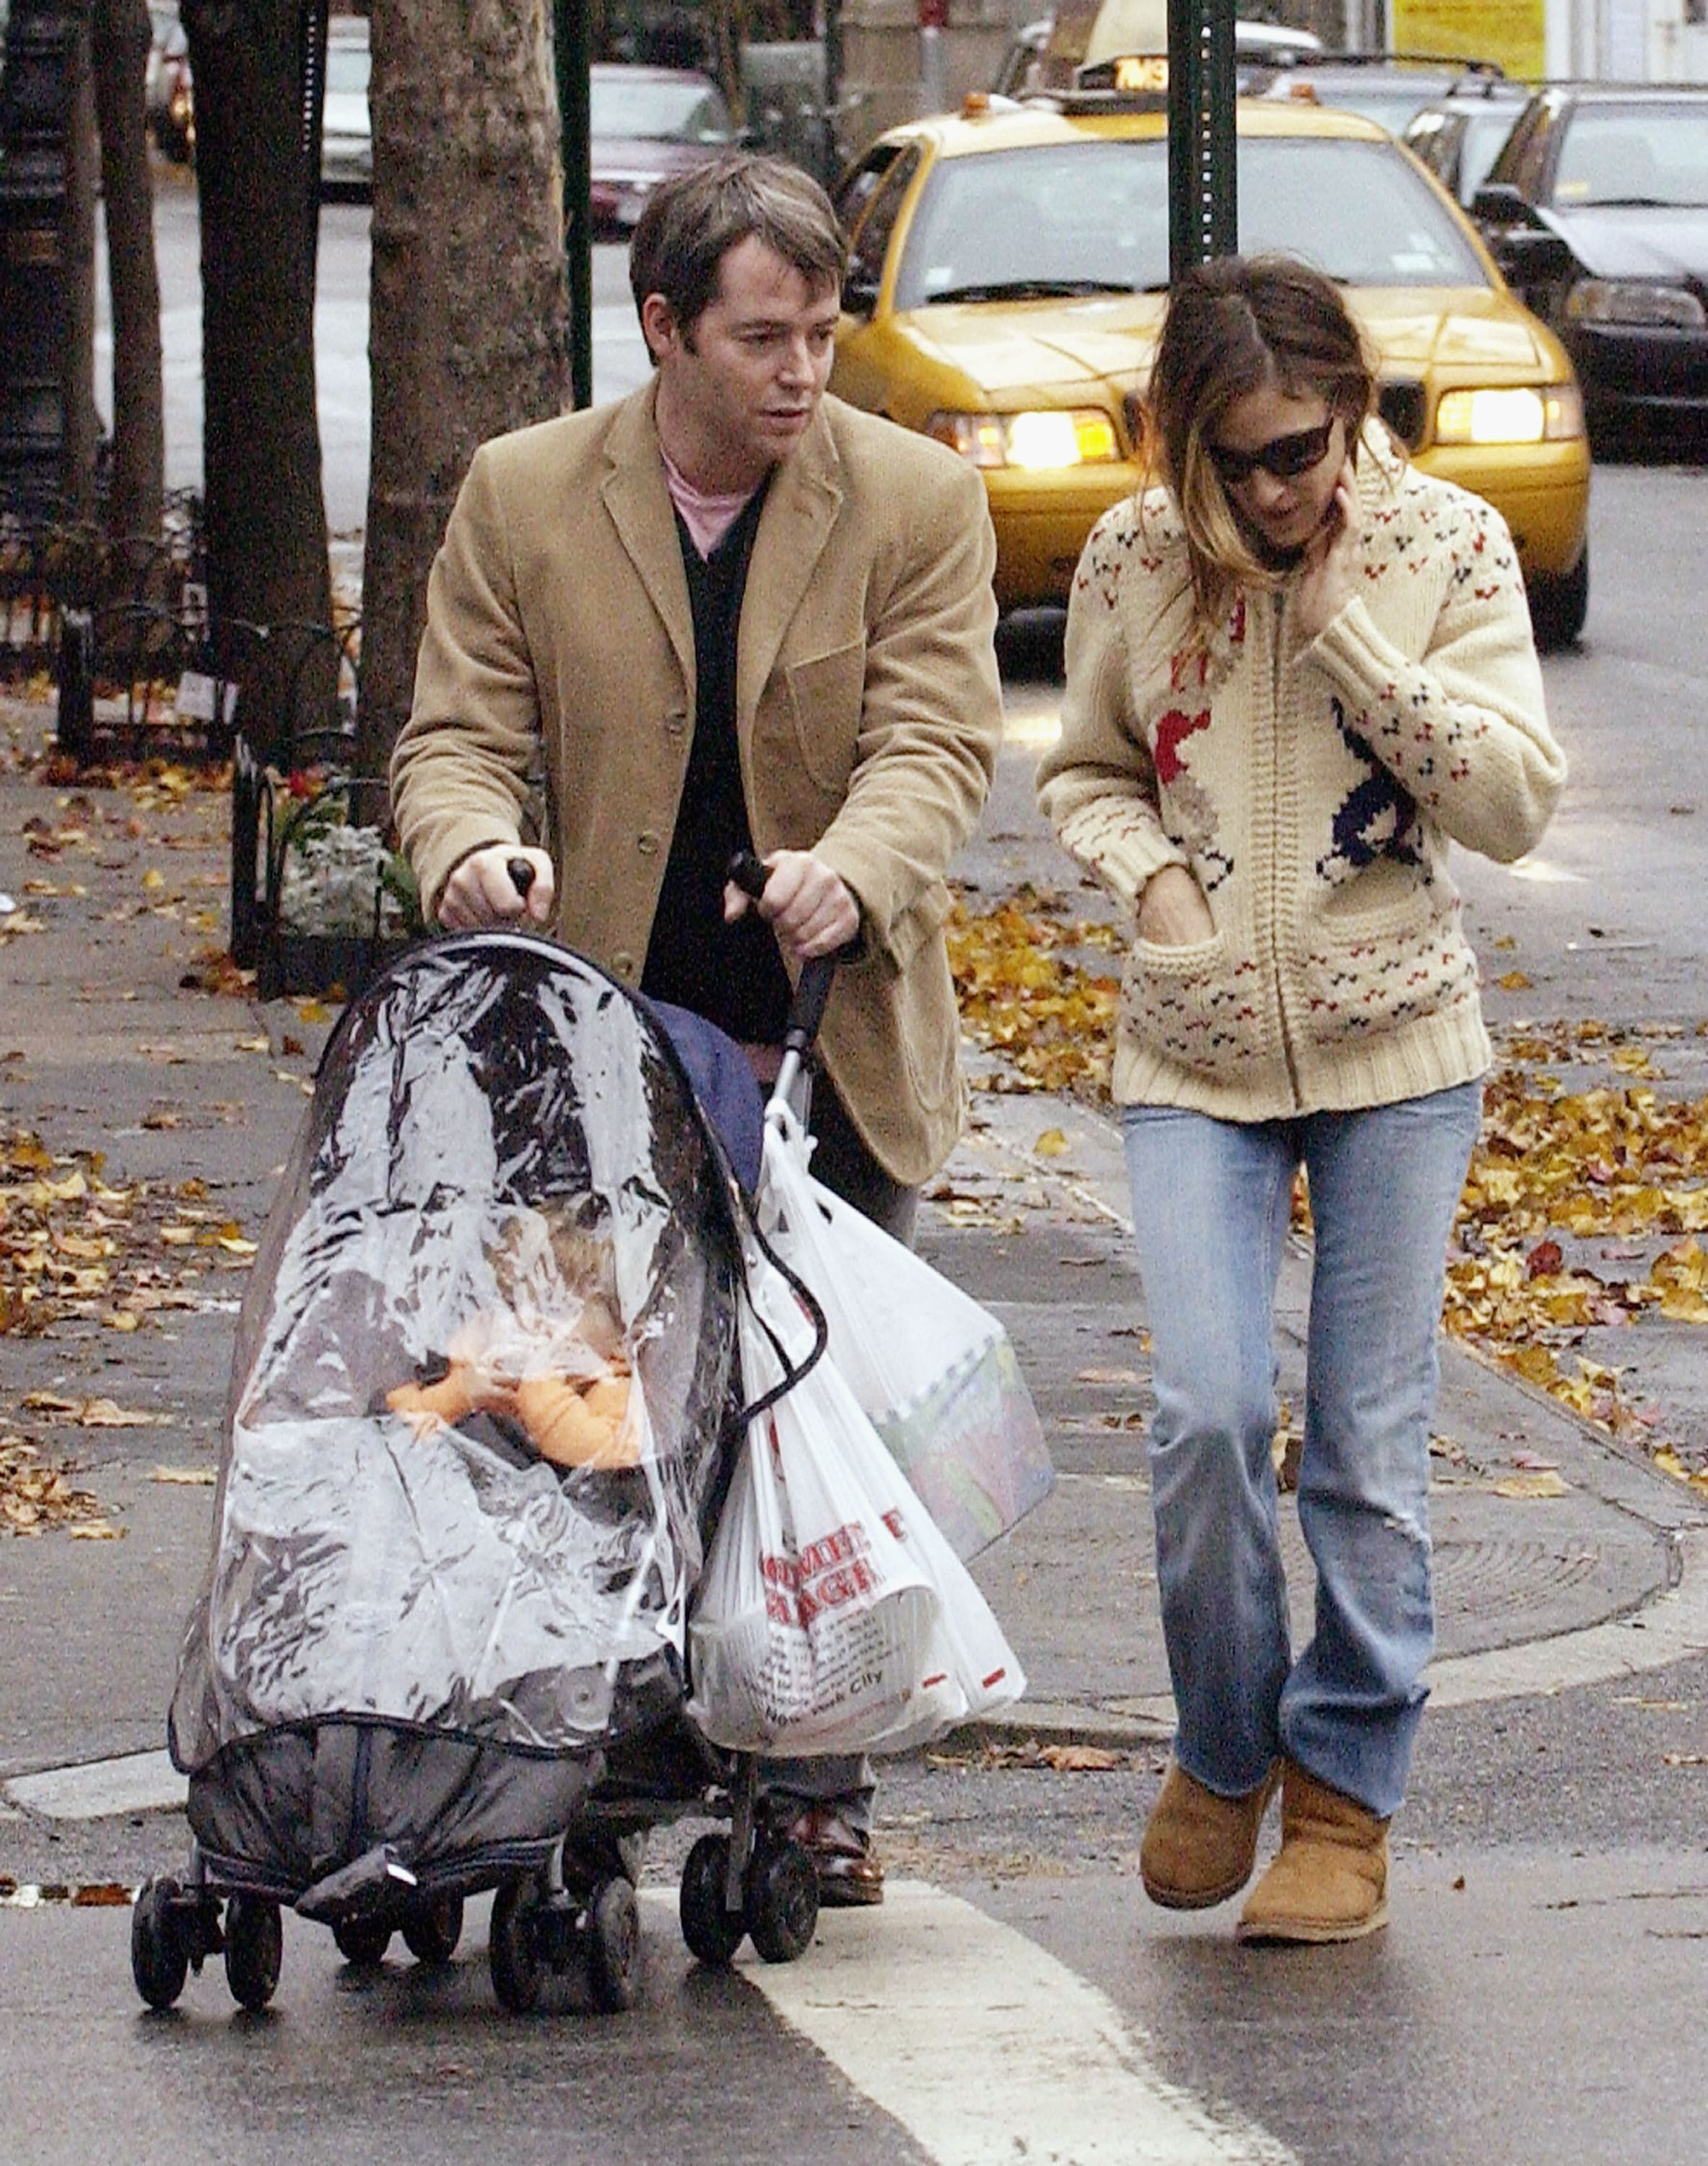 Matthew Broderick, James Wilke Broderick, and Sarah Jessica Parker in the West Village, New York, on November 25, 2004 | Source: Getty Images 